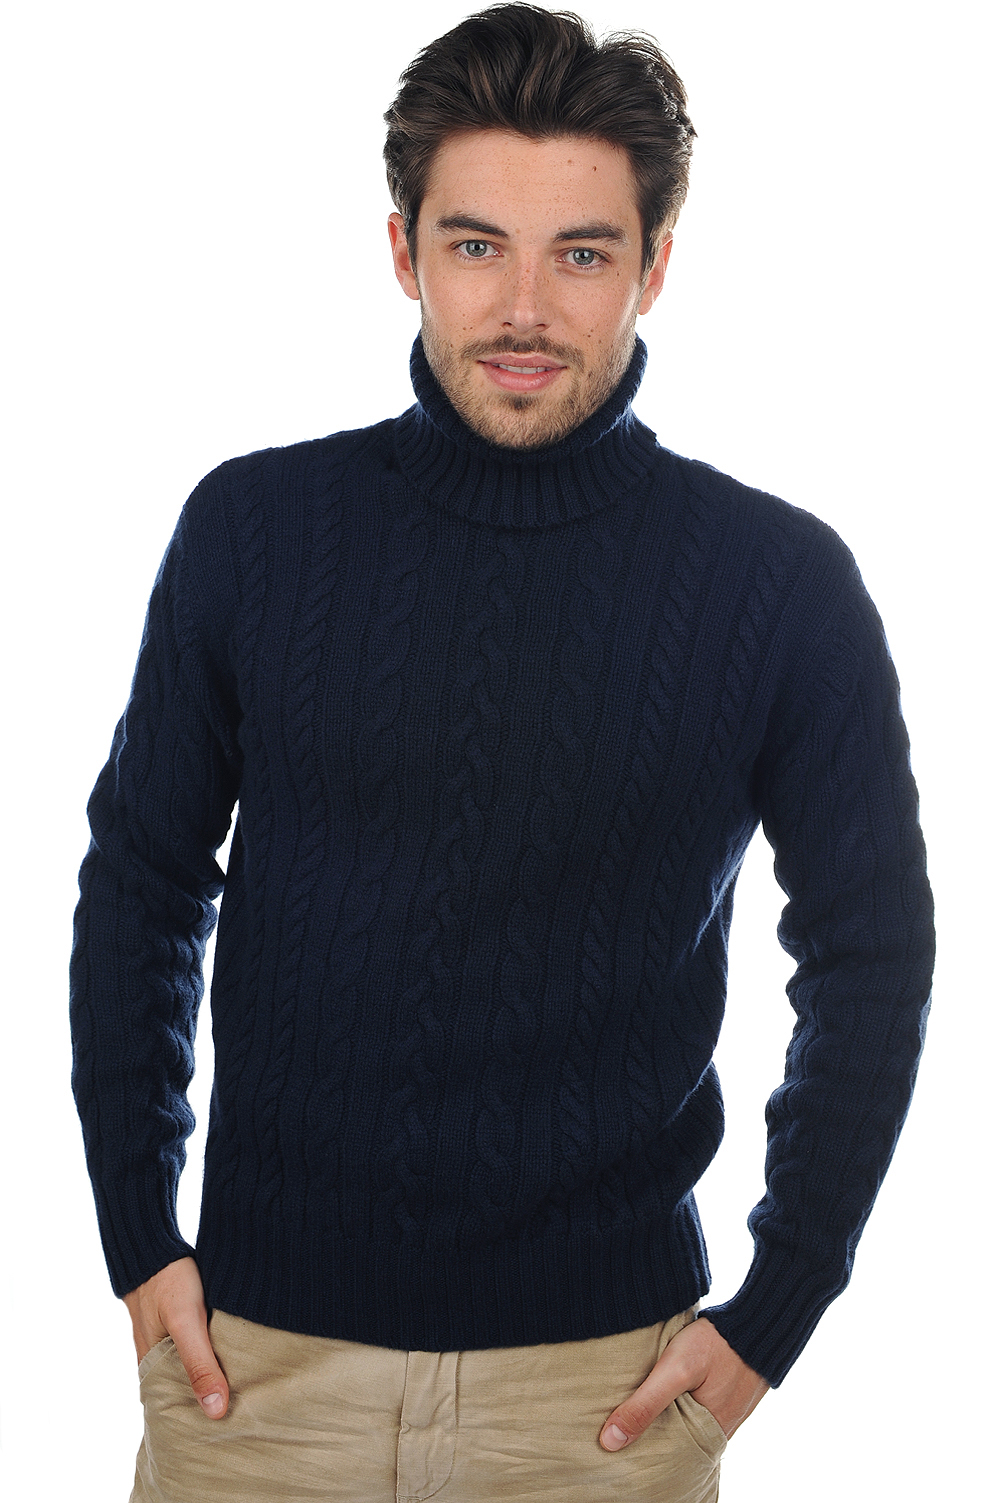 Cachemire pull homme col roule lucas marine fonce 3xl